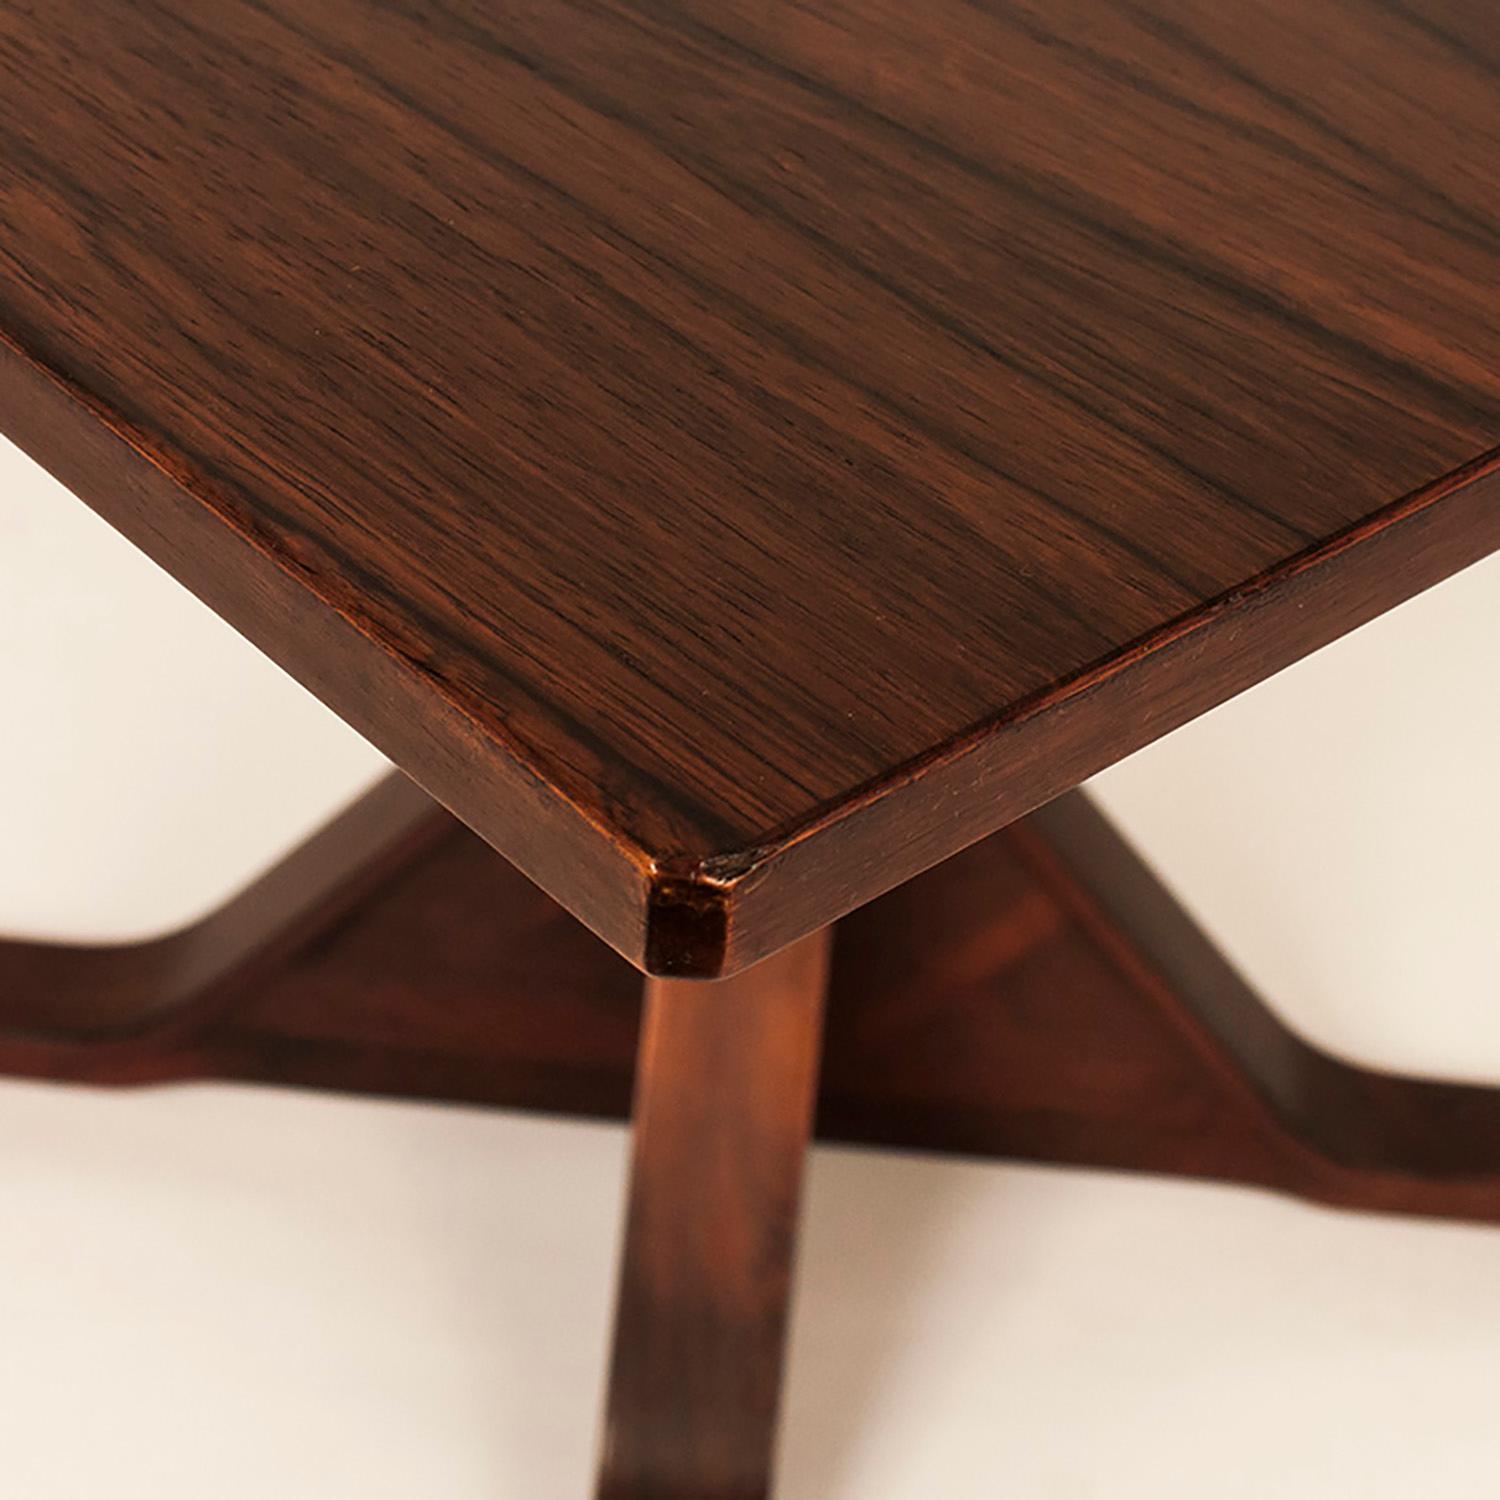 Dining table designed by Gianfranco Fratini for Bernini in 1950s.

It can be used also like a game table. Mahogany

   